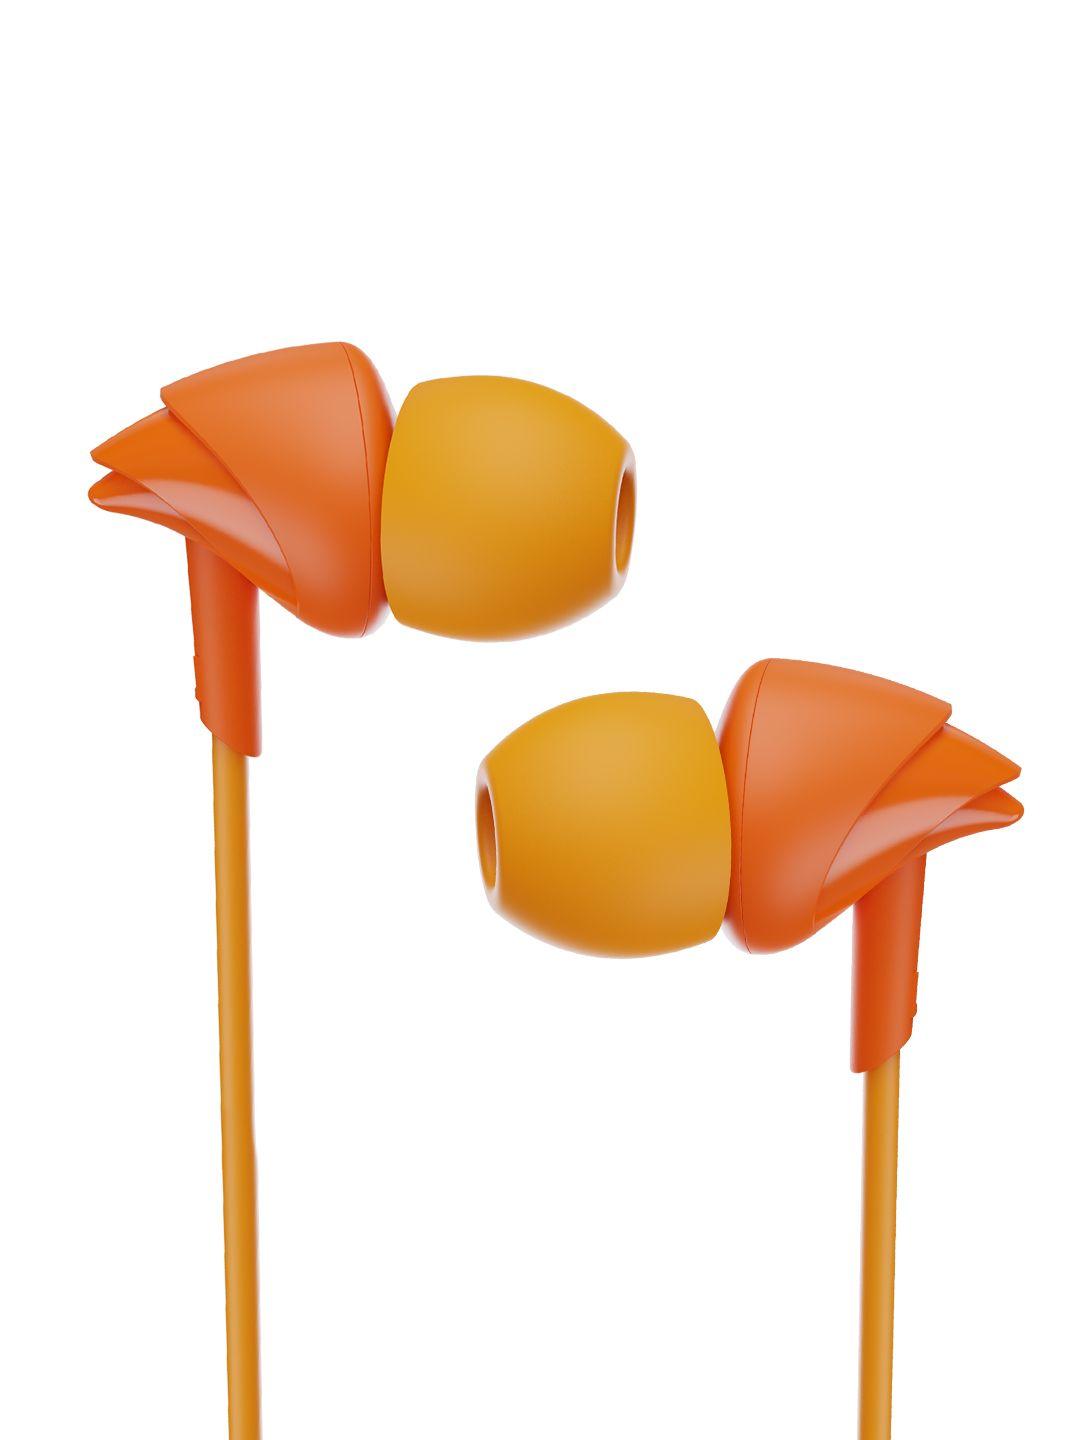 boat bassheads 100 m mint orange wired earphones with hawk-inspired design & mic